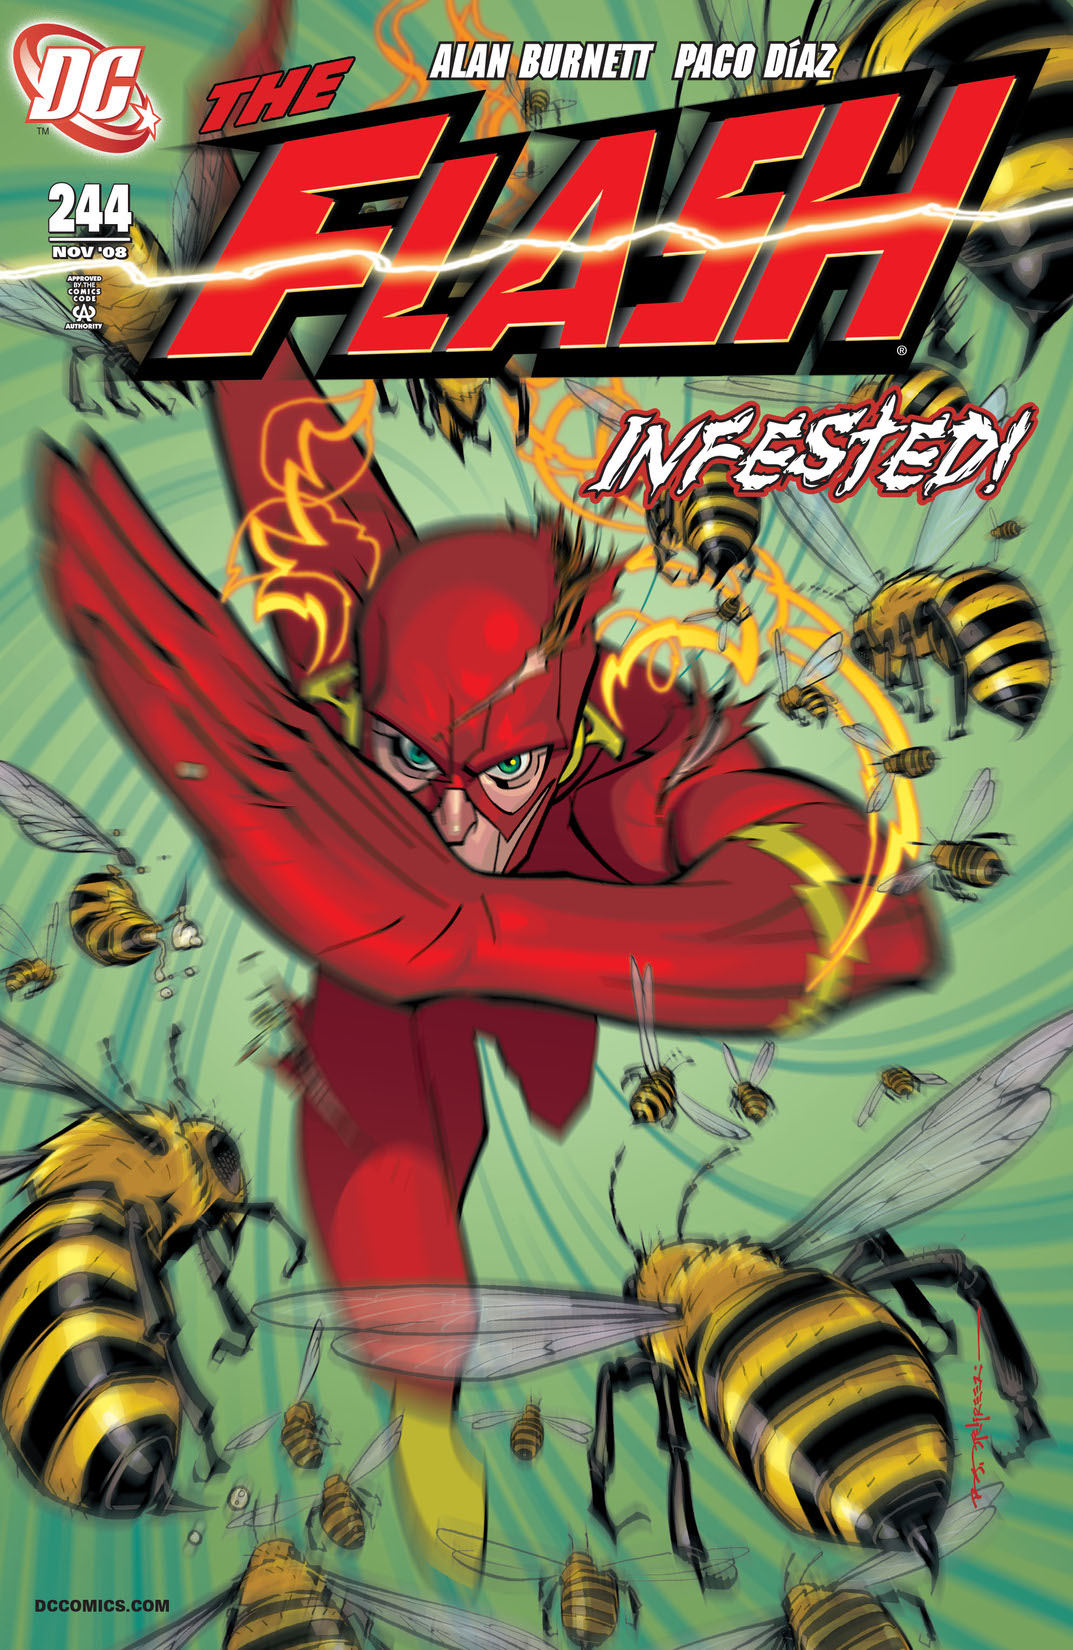 The Flash (1987-) #244 preview images